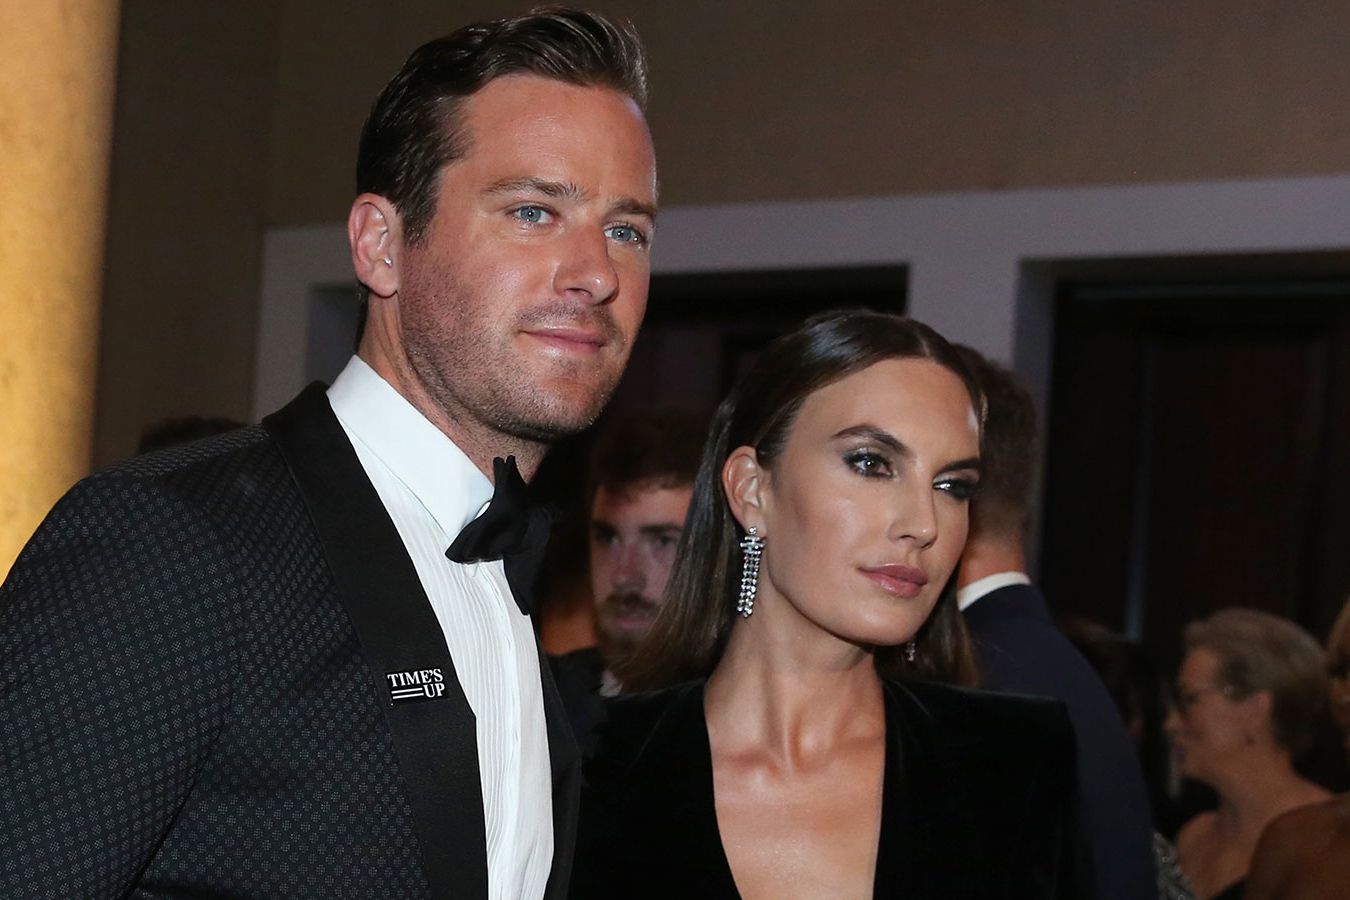 Armie ex allegedly used a friend's email to with journalists amid split | CNN